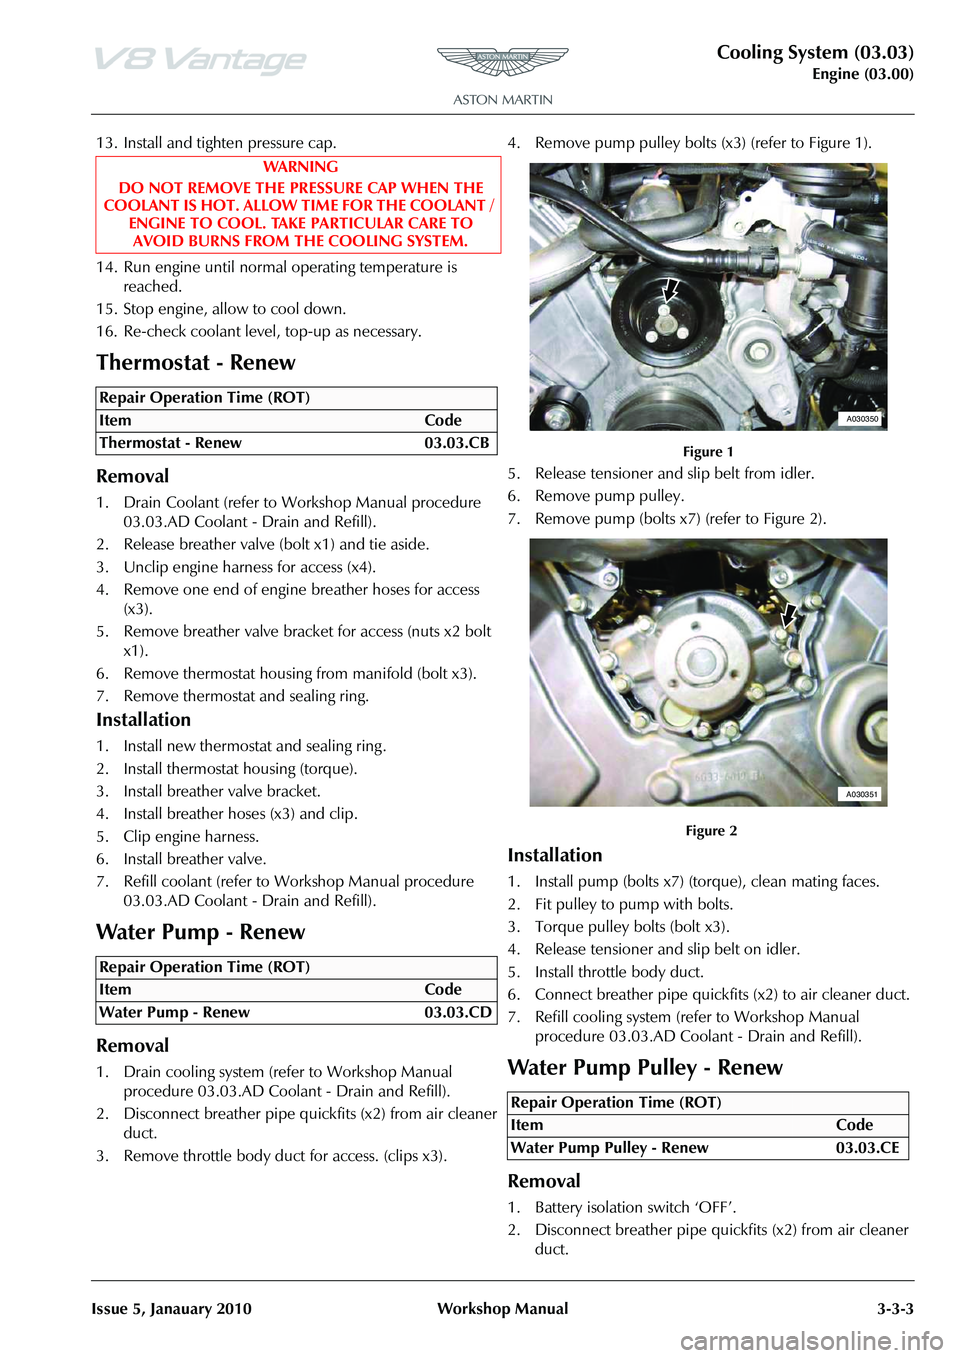 ASTON MARTIN V8 VANTAGE 2010  Workshop Manual Cooling System (03.03)
Engine (03.00)
Issue 5, Janauary 2010 Workshop Manual 3-3-3
13. Install and tighten pressure cap.
14. Run engine until normal operating temperature is  reached.
15. Stop engine,